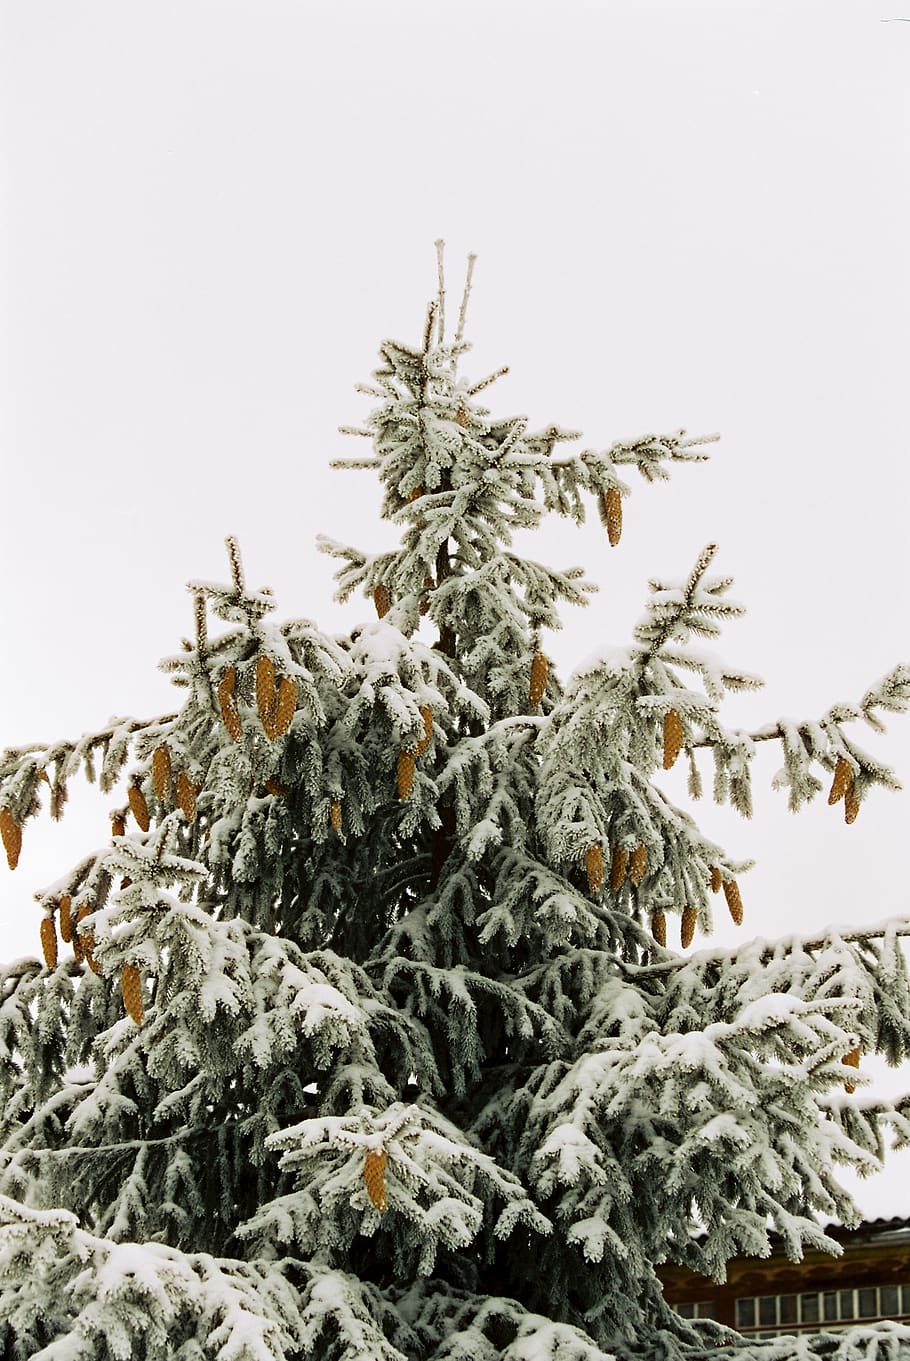 ice on pinetree, snow, cold temperature, winter, plant, no people